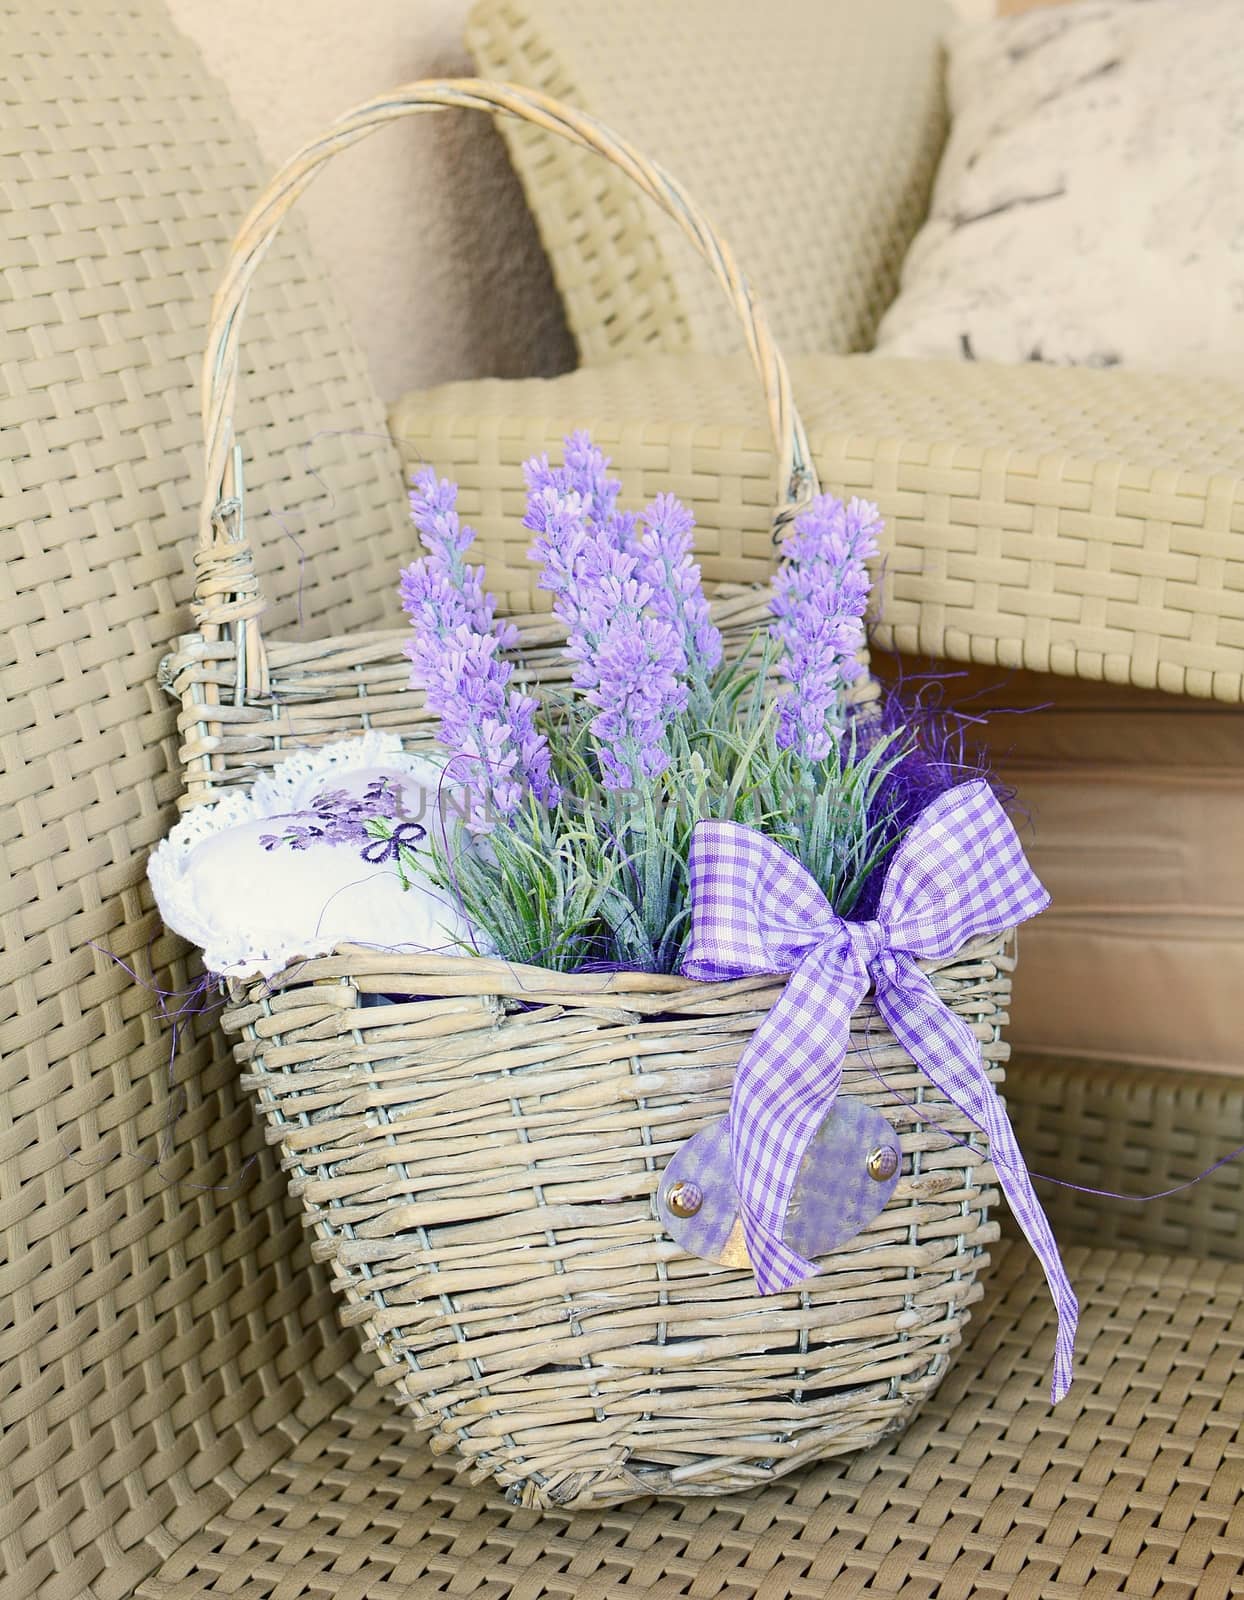 Basket with lavender and ribbon home decoration.